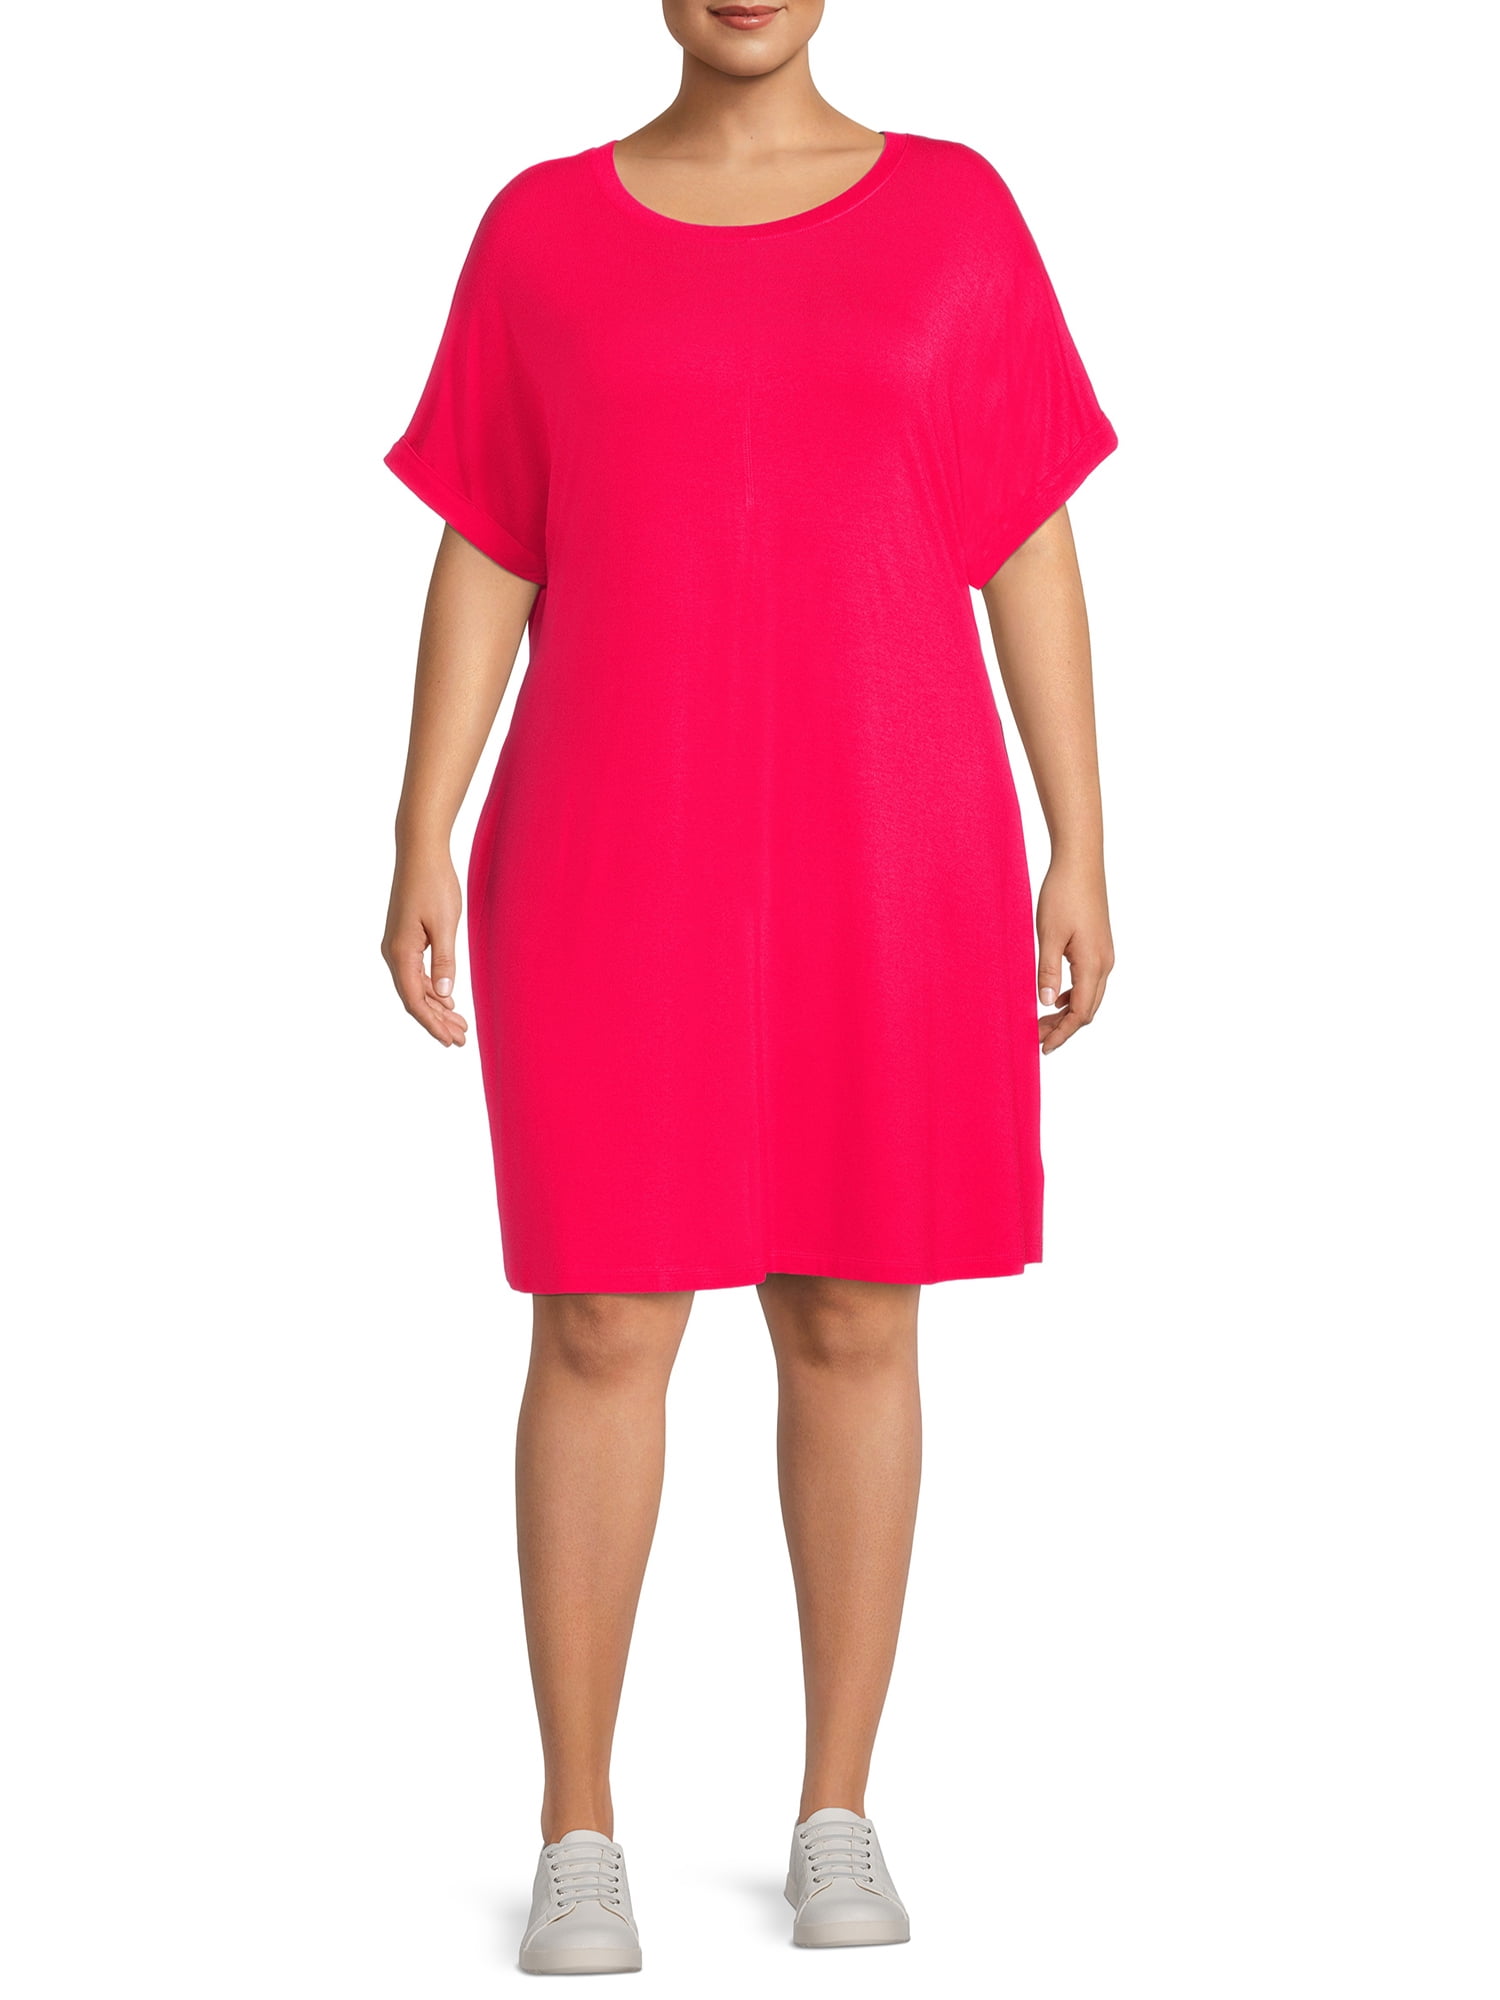 Score the Best of Both Worlds with a Plus Size Shirt Dress